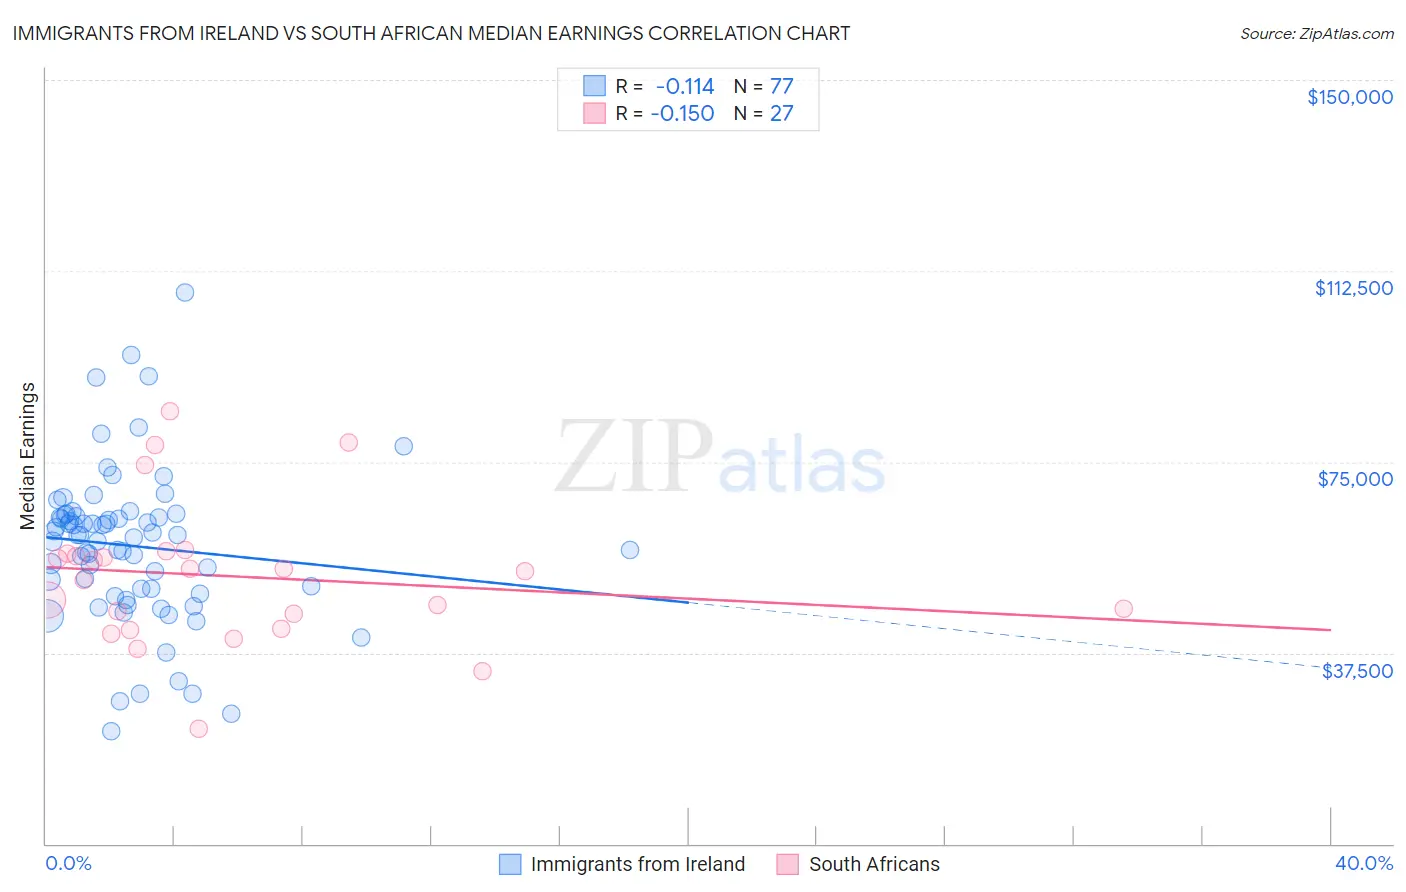 Immigrants from Ireland vs South African Median Earnings